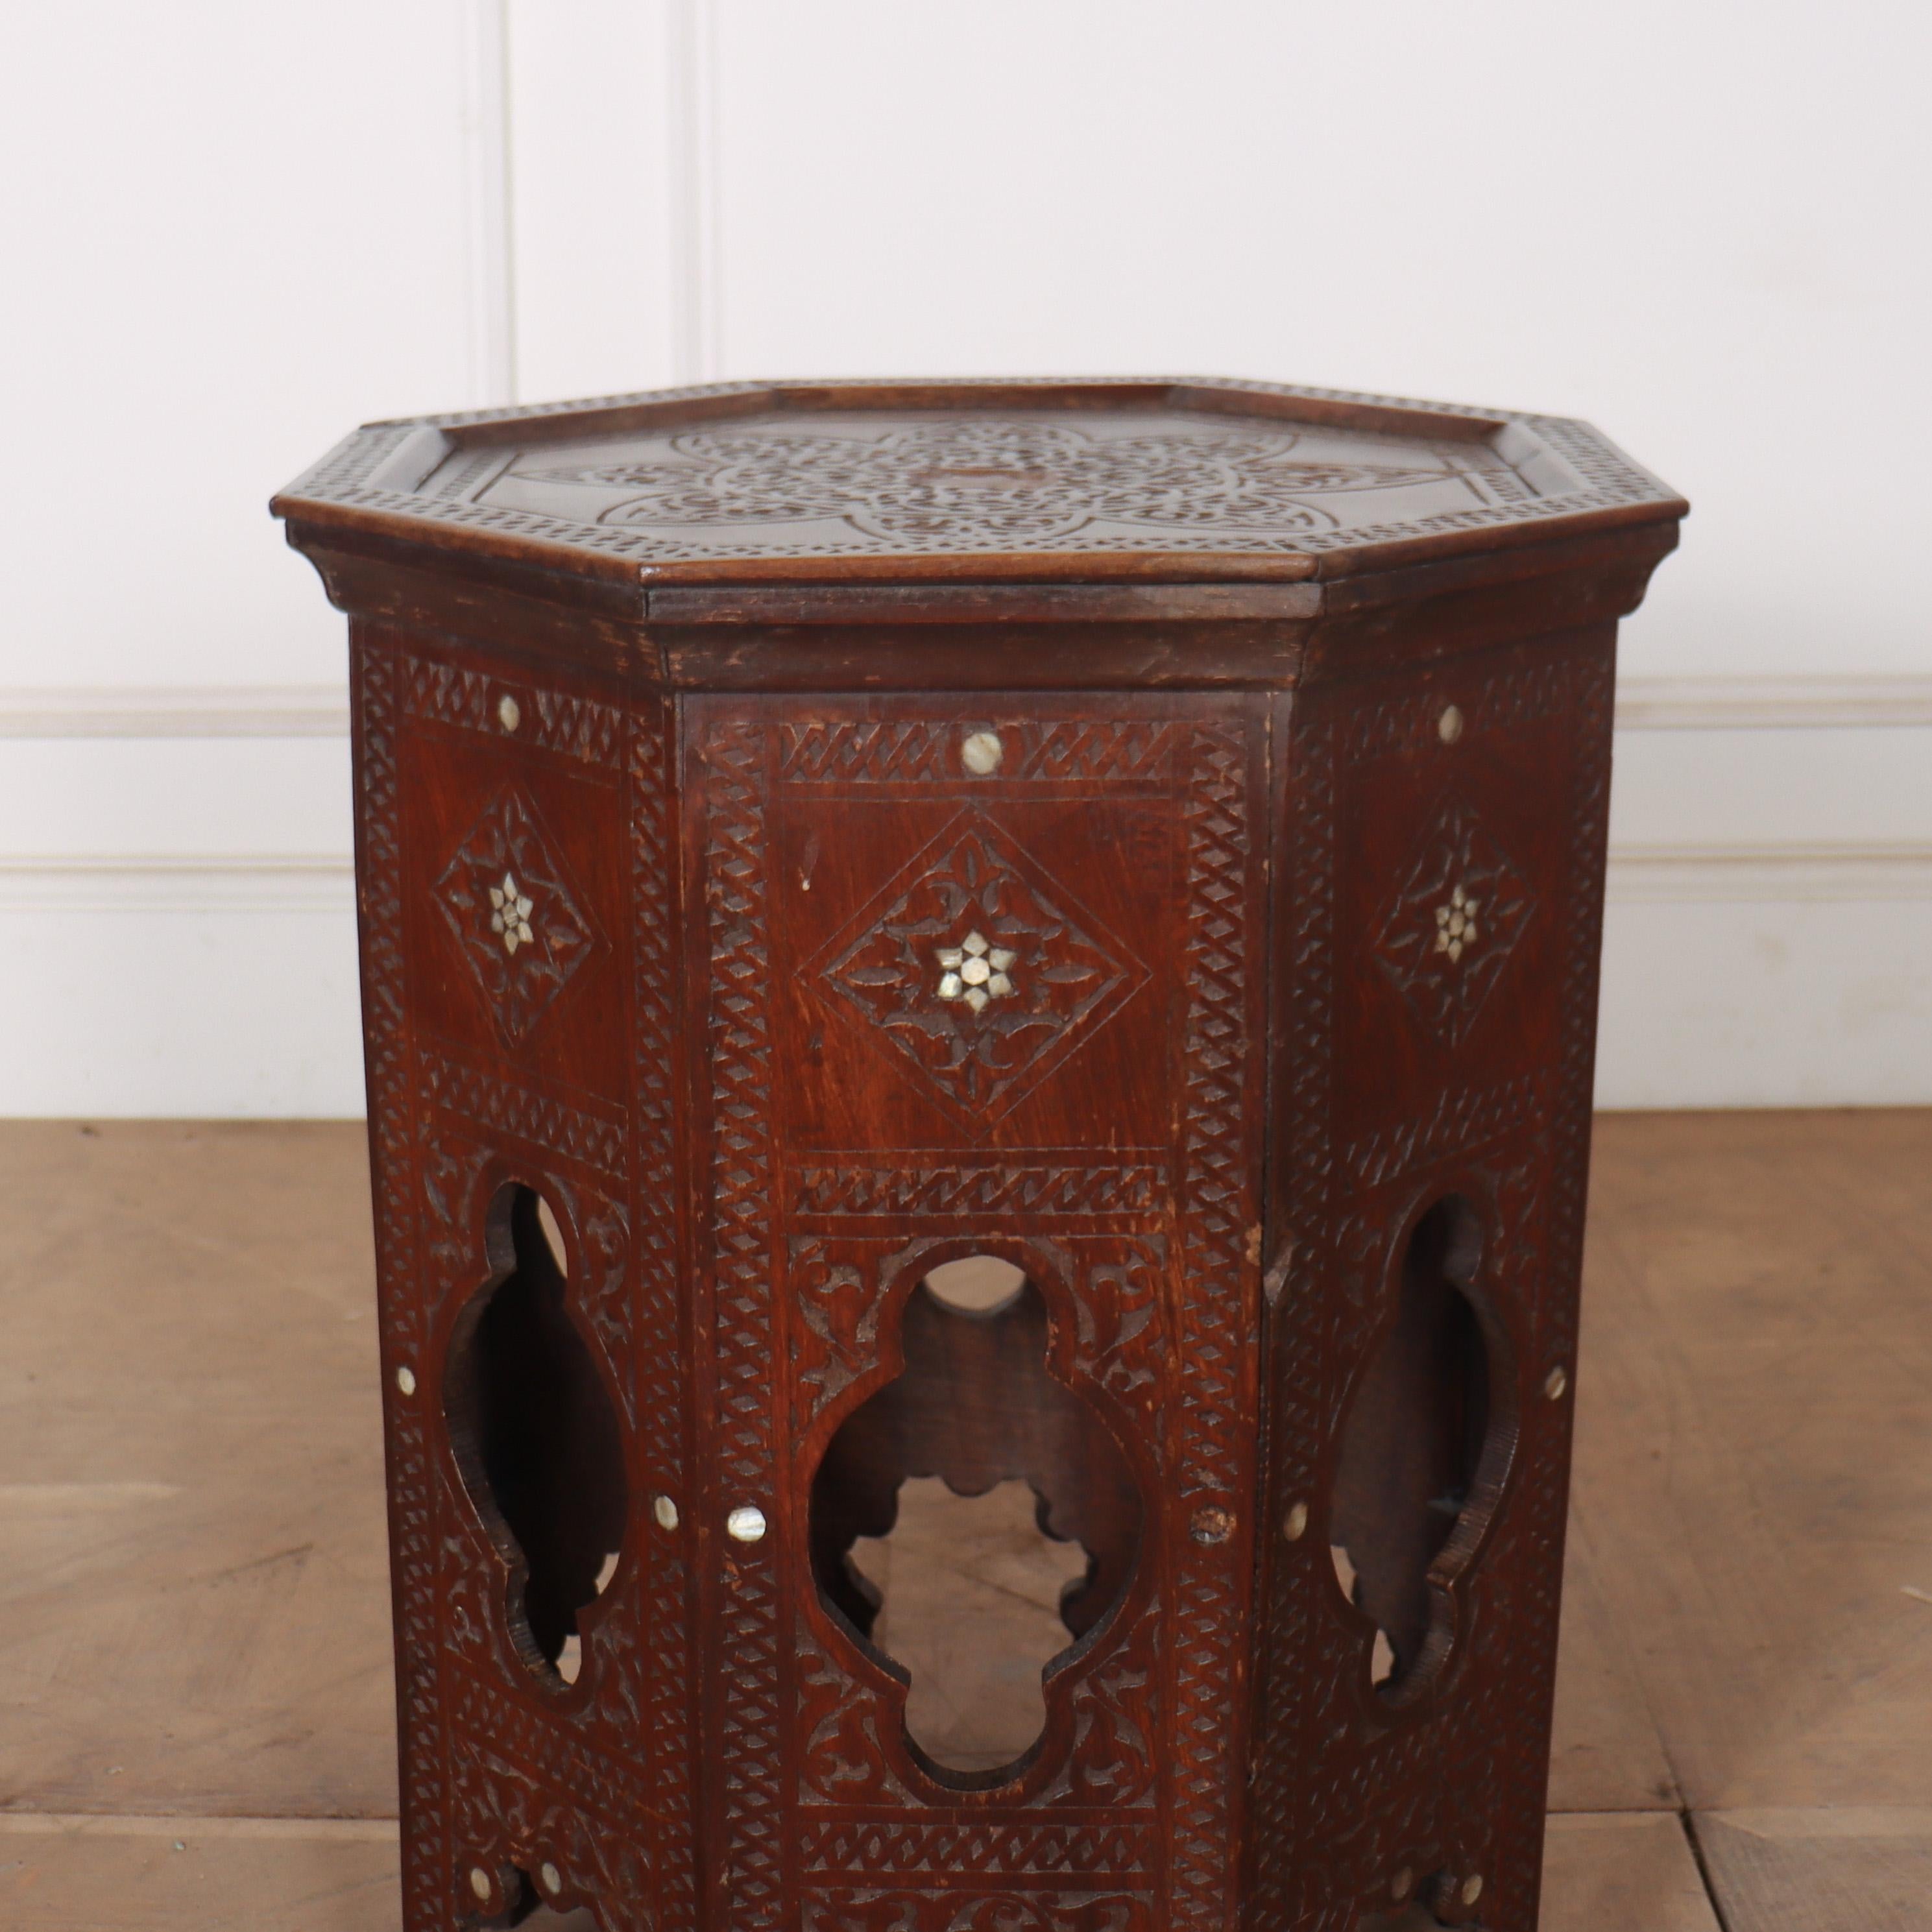 Small inlaid Islamic lamp / side table. 1890.

Reference: 8267

Dimensions
22.5 inches (57 cms) High
18.5 inches (47 cms) Diameter